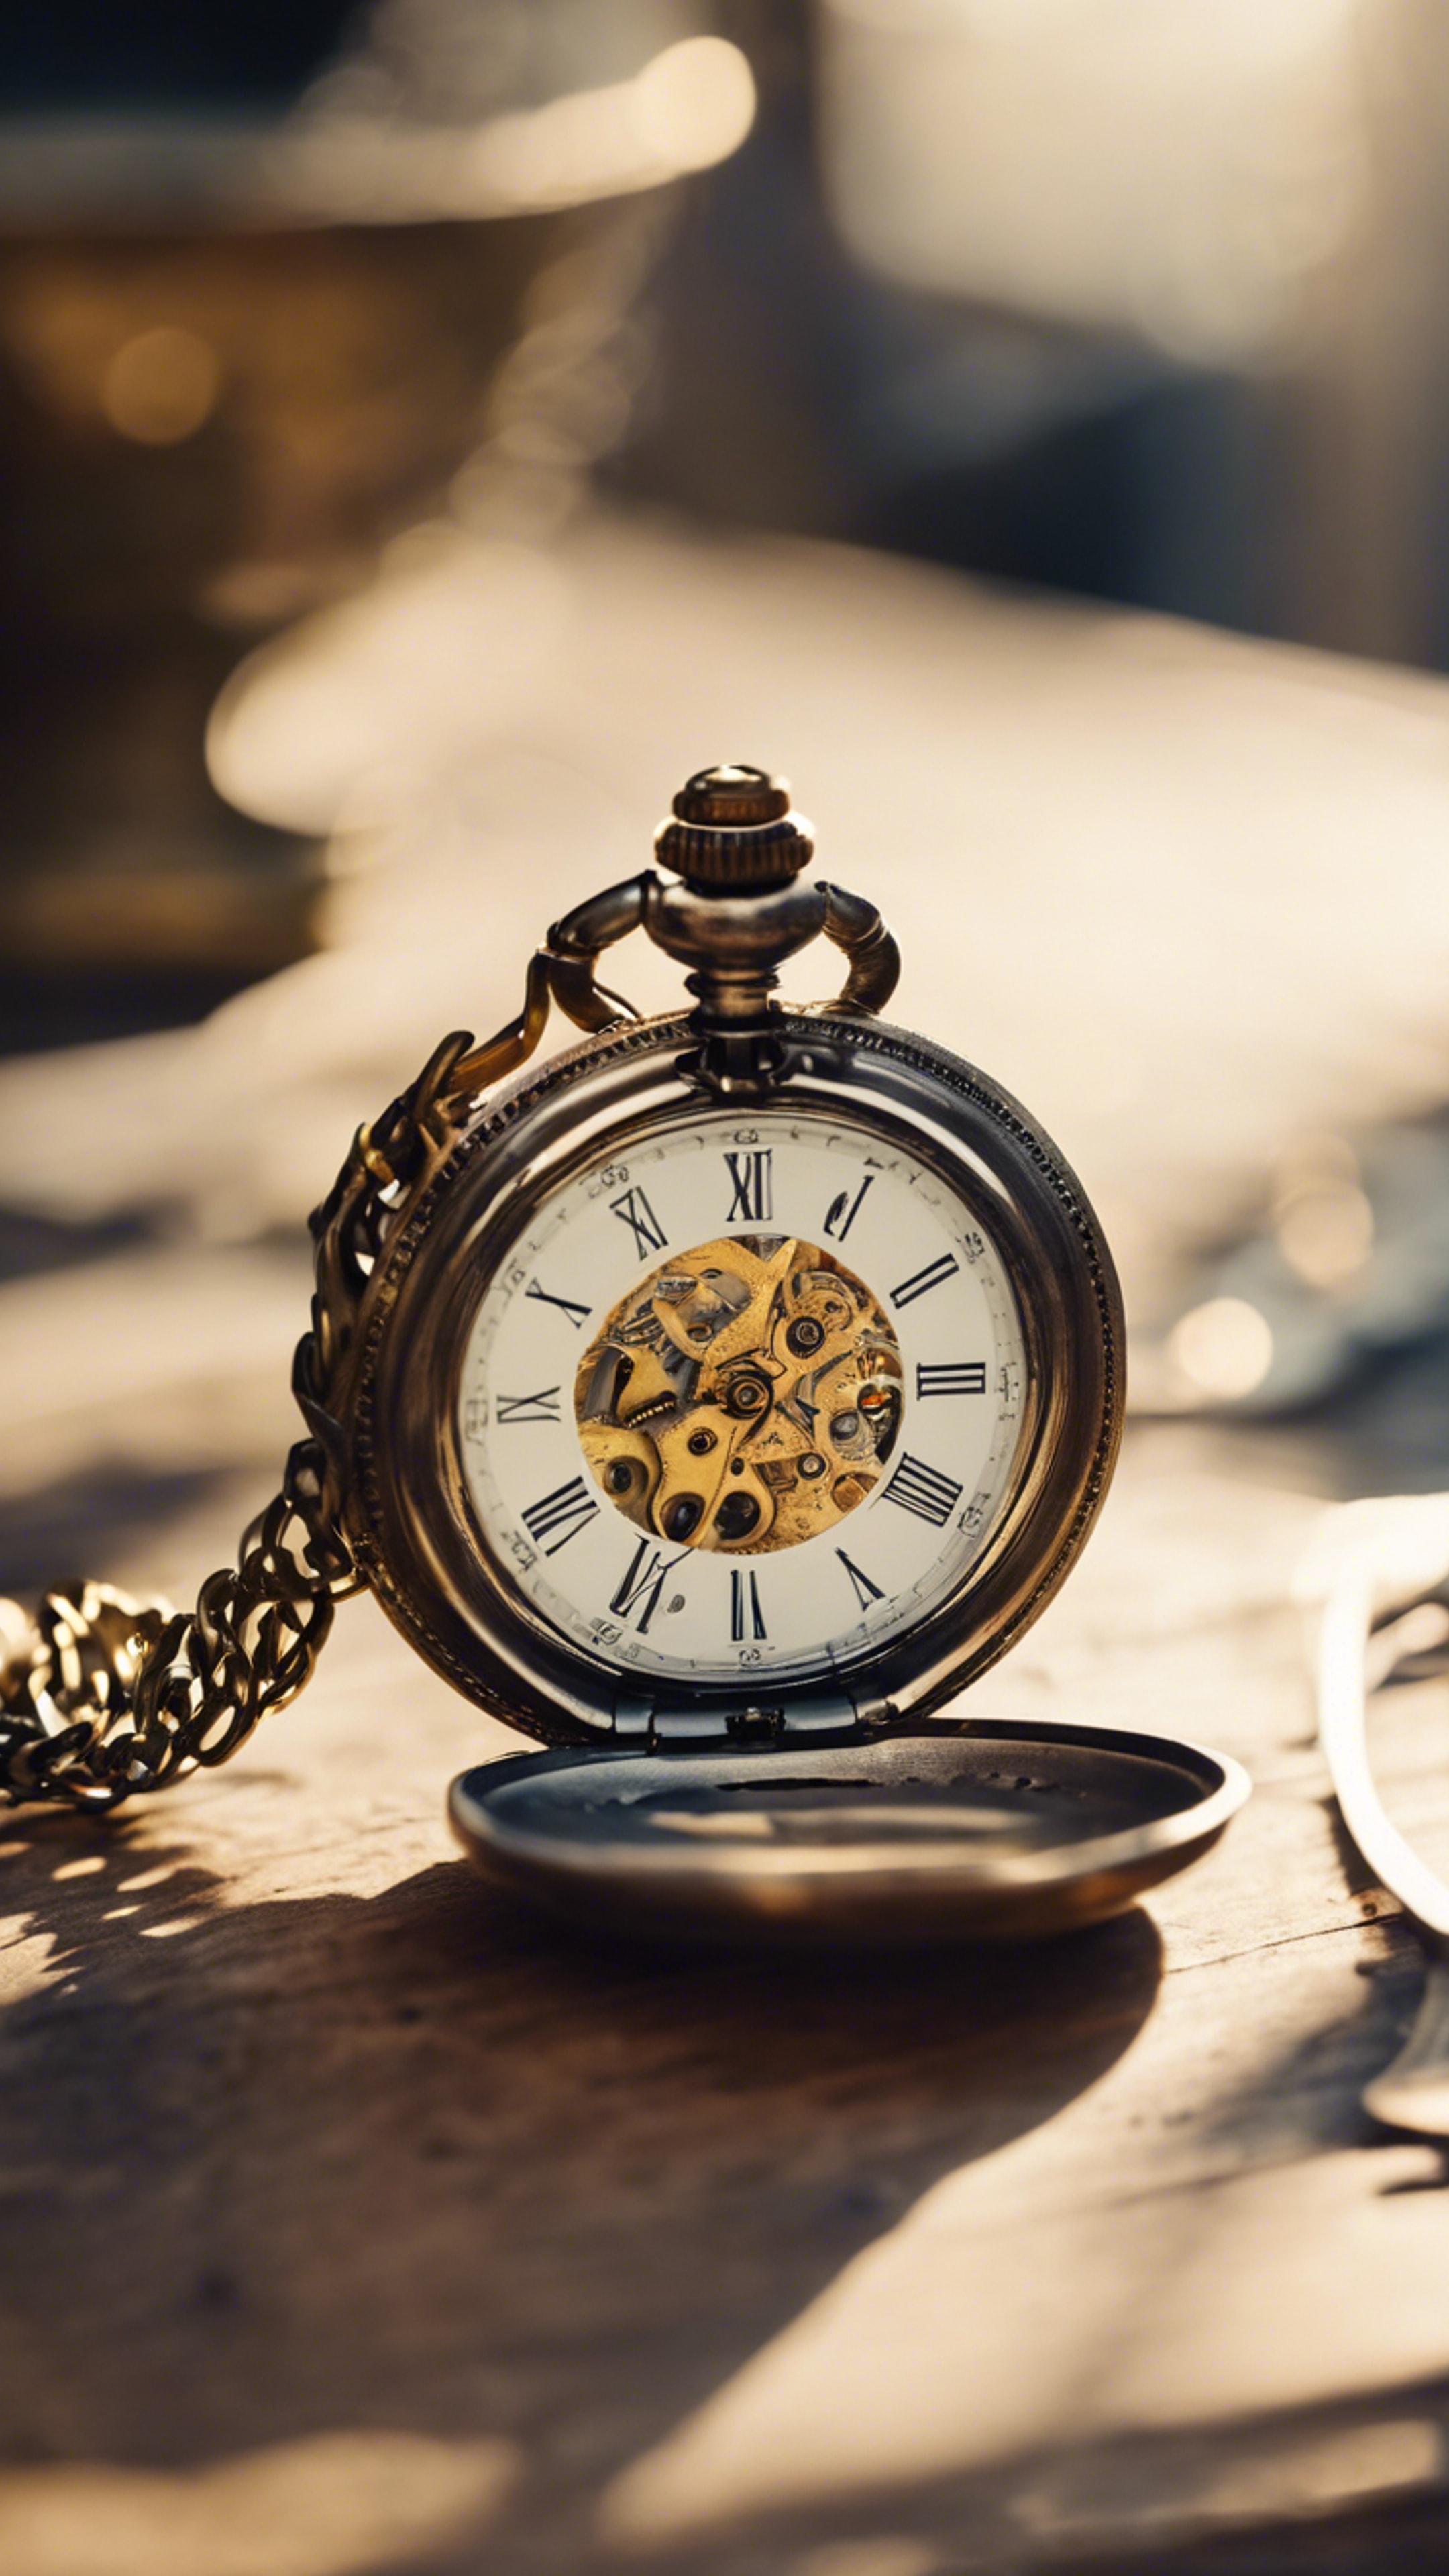 A vintage pocket watch, lying open on an antique table, reflecting the golden rays of afternoon sun. Tapéta[0f0622e1f4f2468db79b]